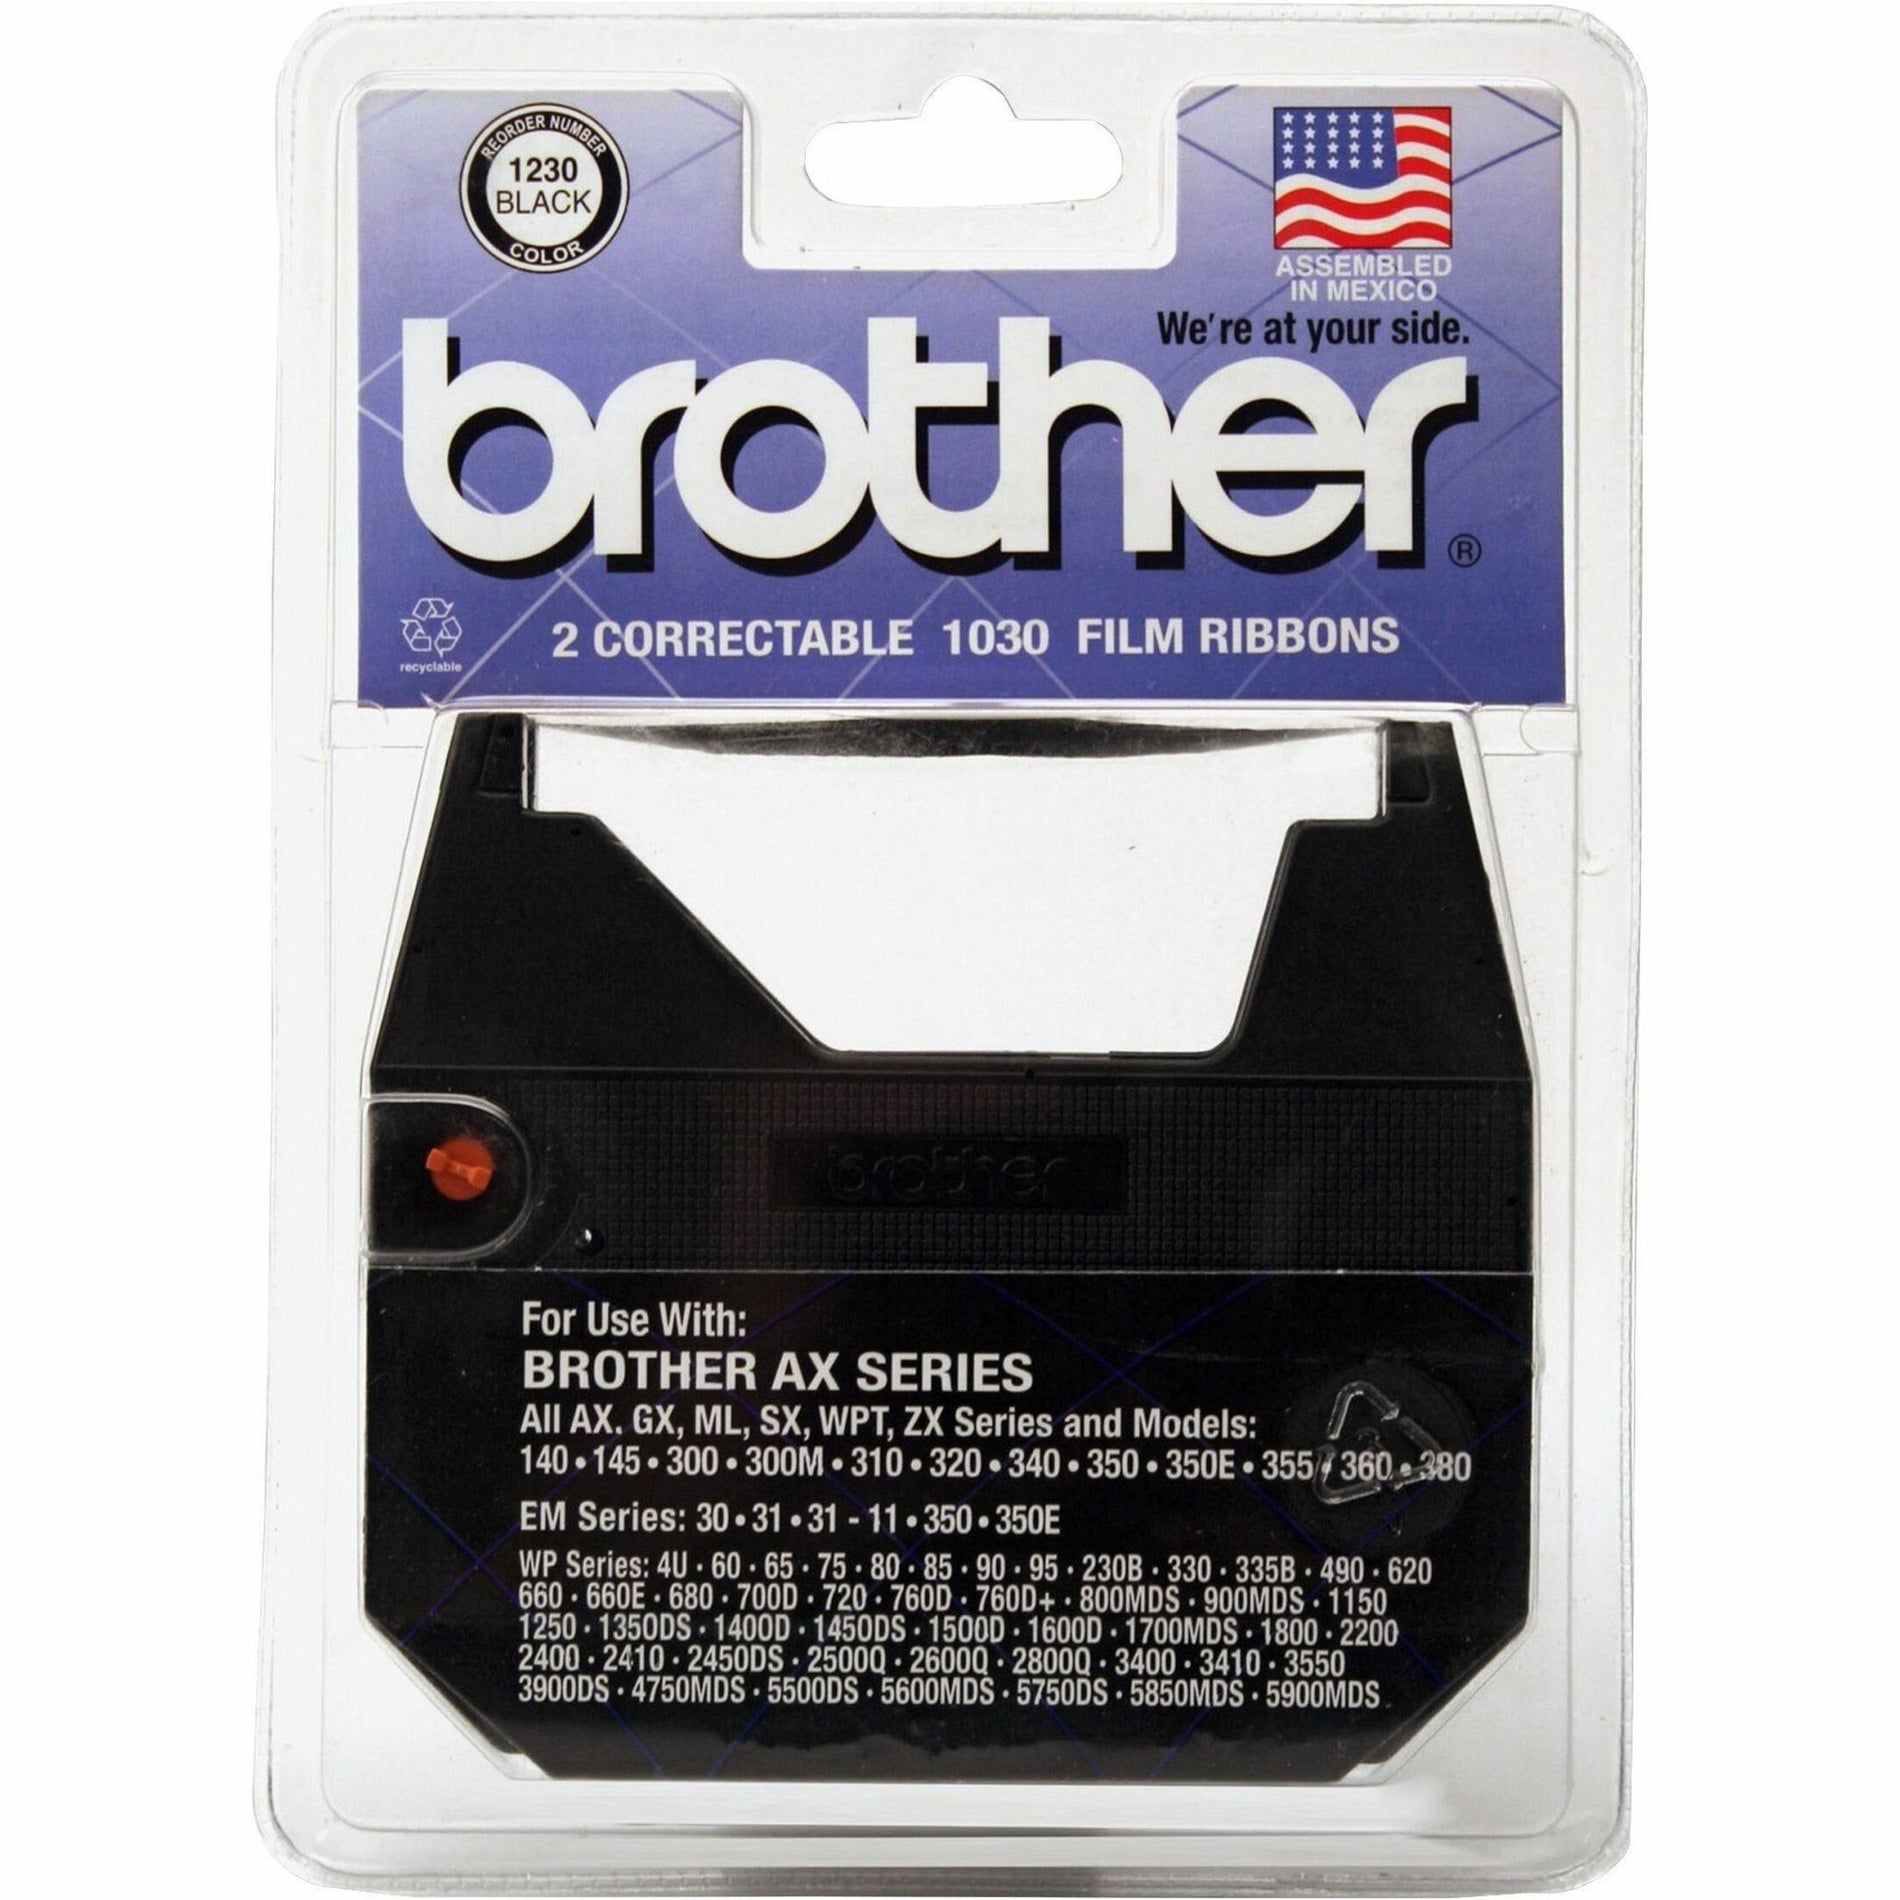 Brother Ribbon Cartridge - 50000 Characters - Black - 2 / Pack (1230)